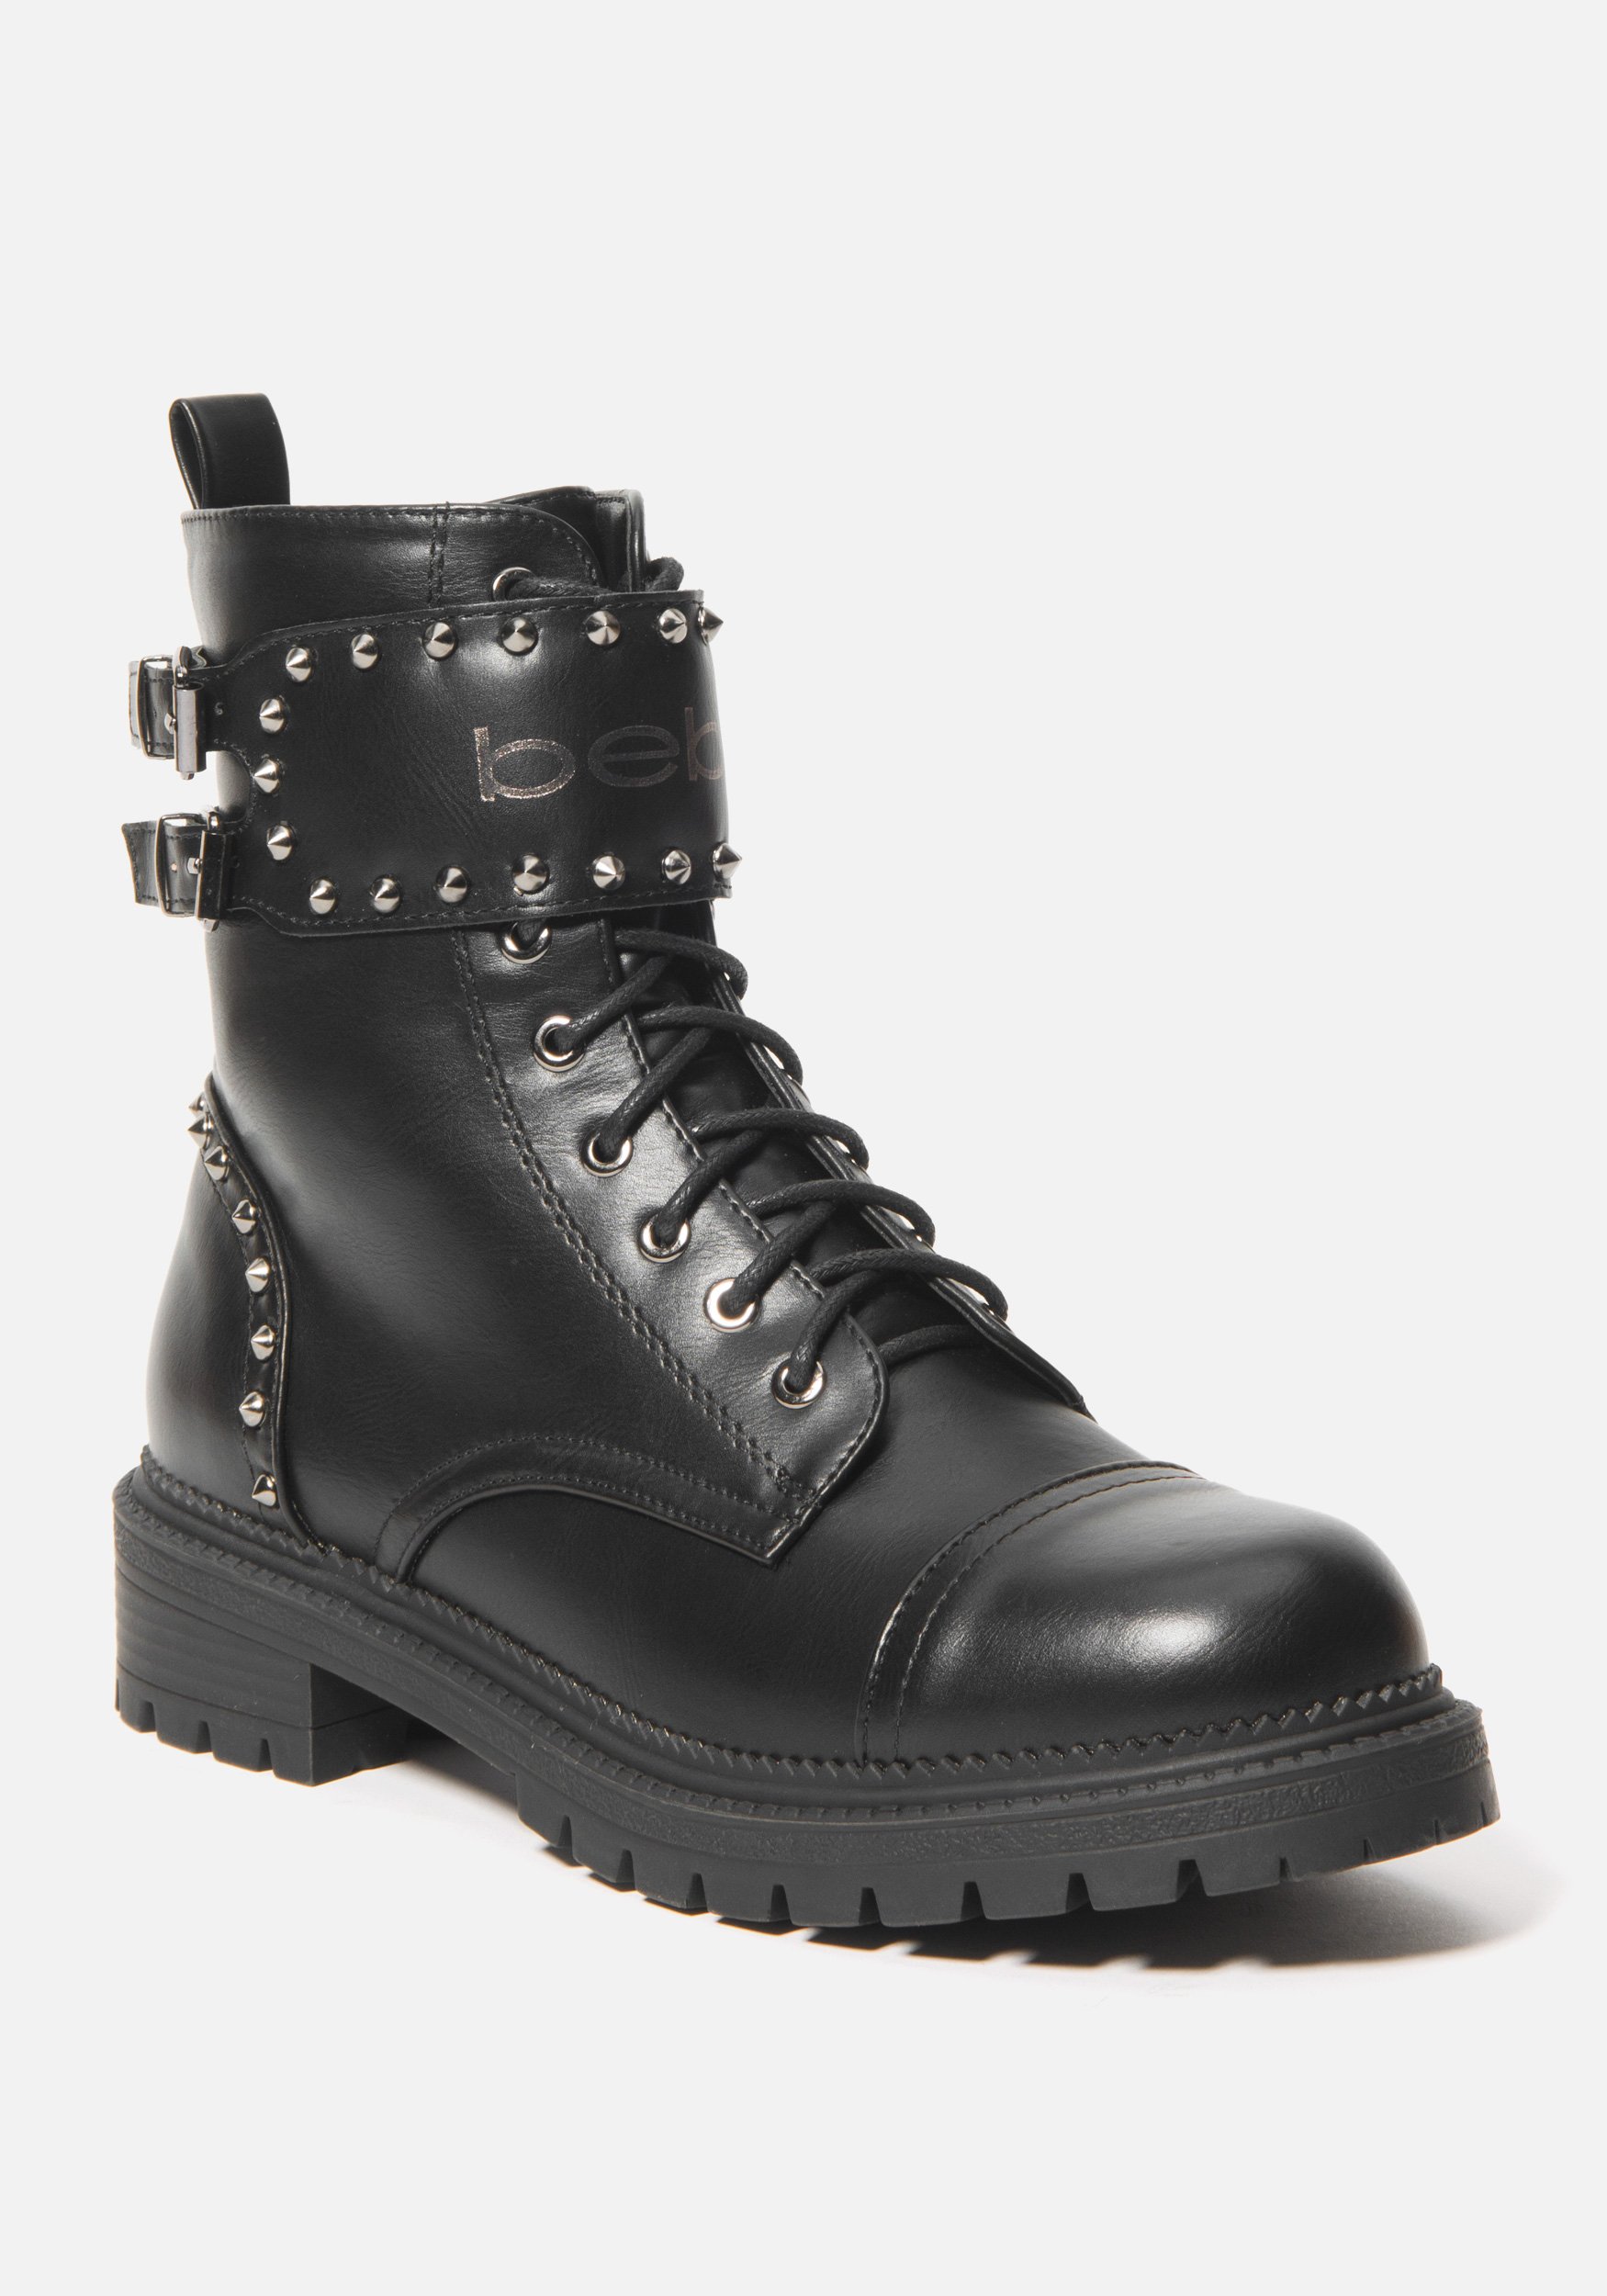 Bebe Women's Dalila Combat Boots, Size 6 in Black Synthetic